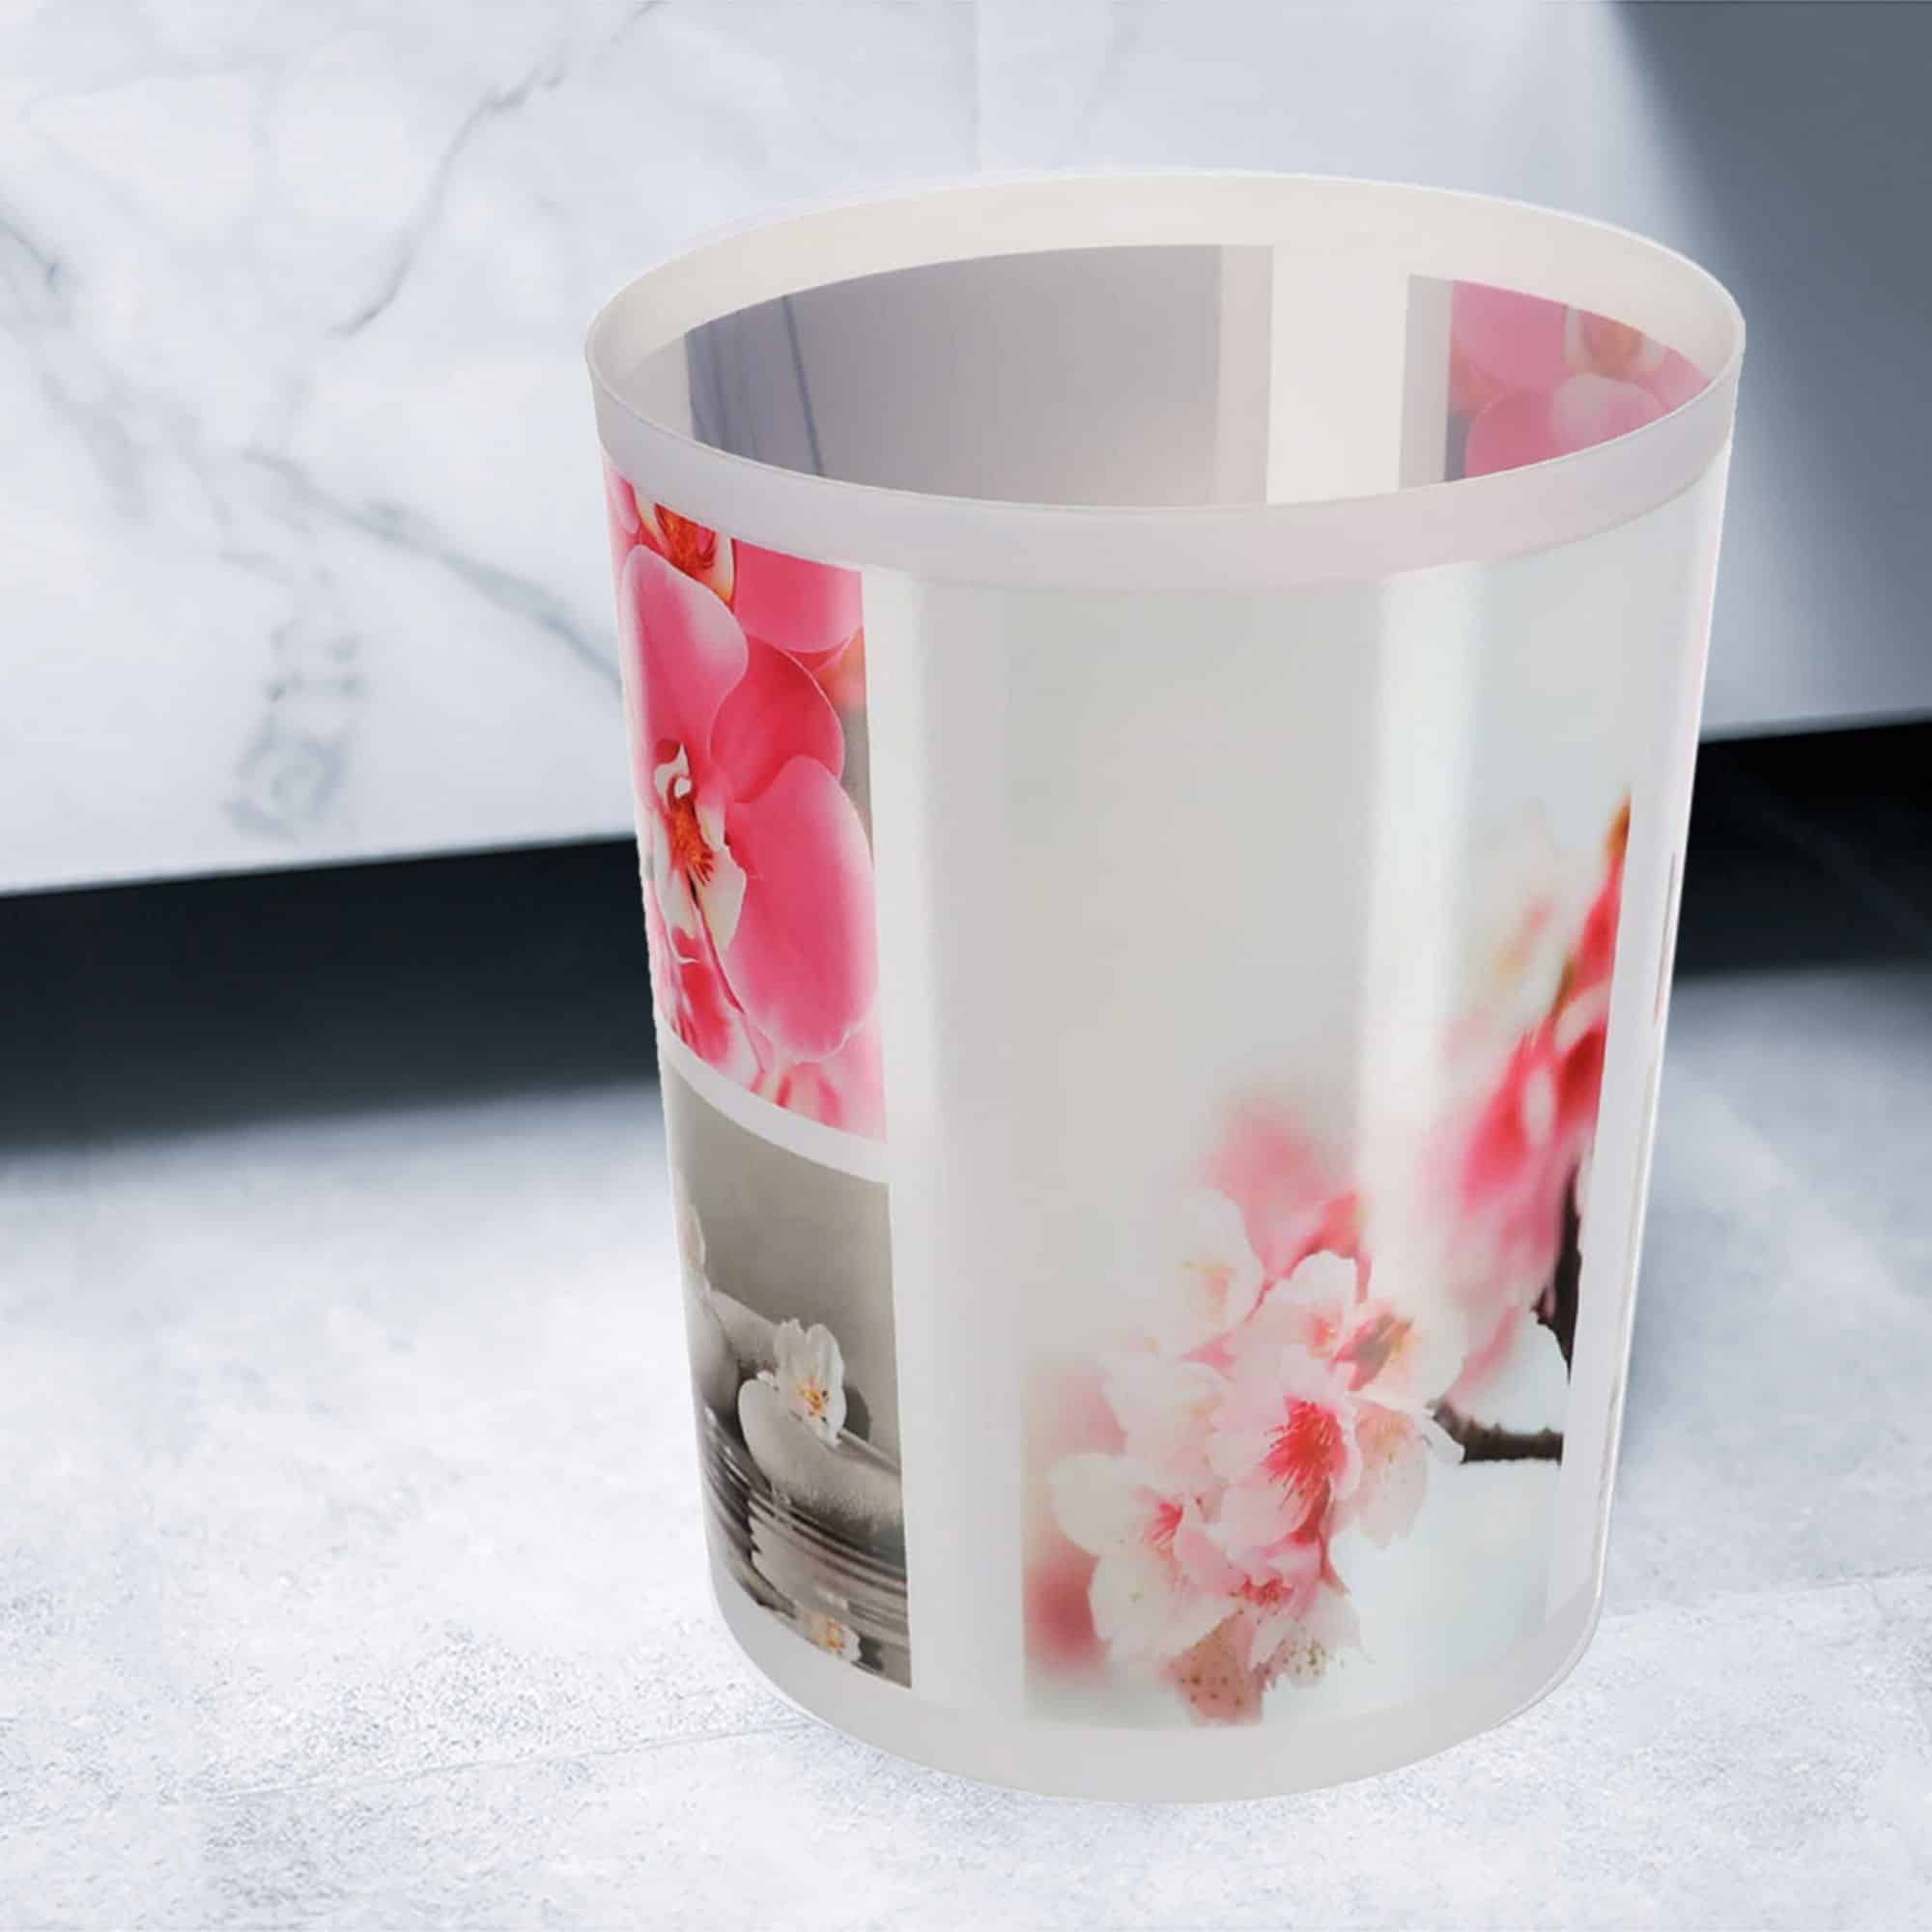 relaxing design of orchids, cherry blossoms and stones in pink and gray tones